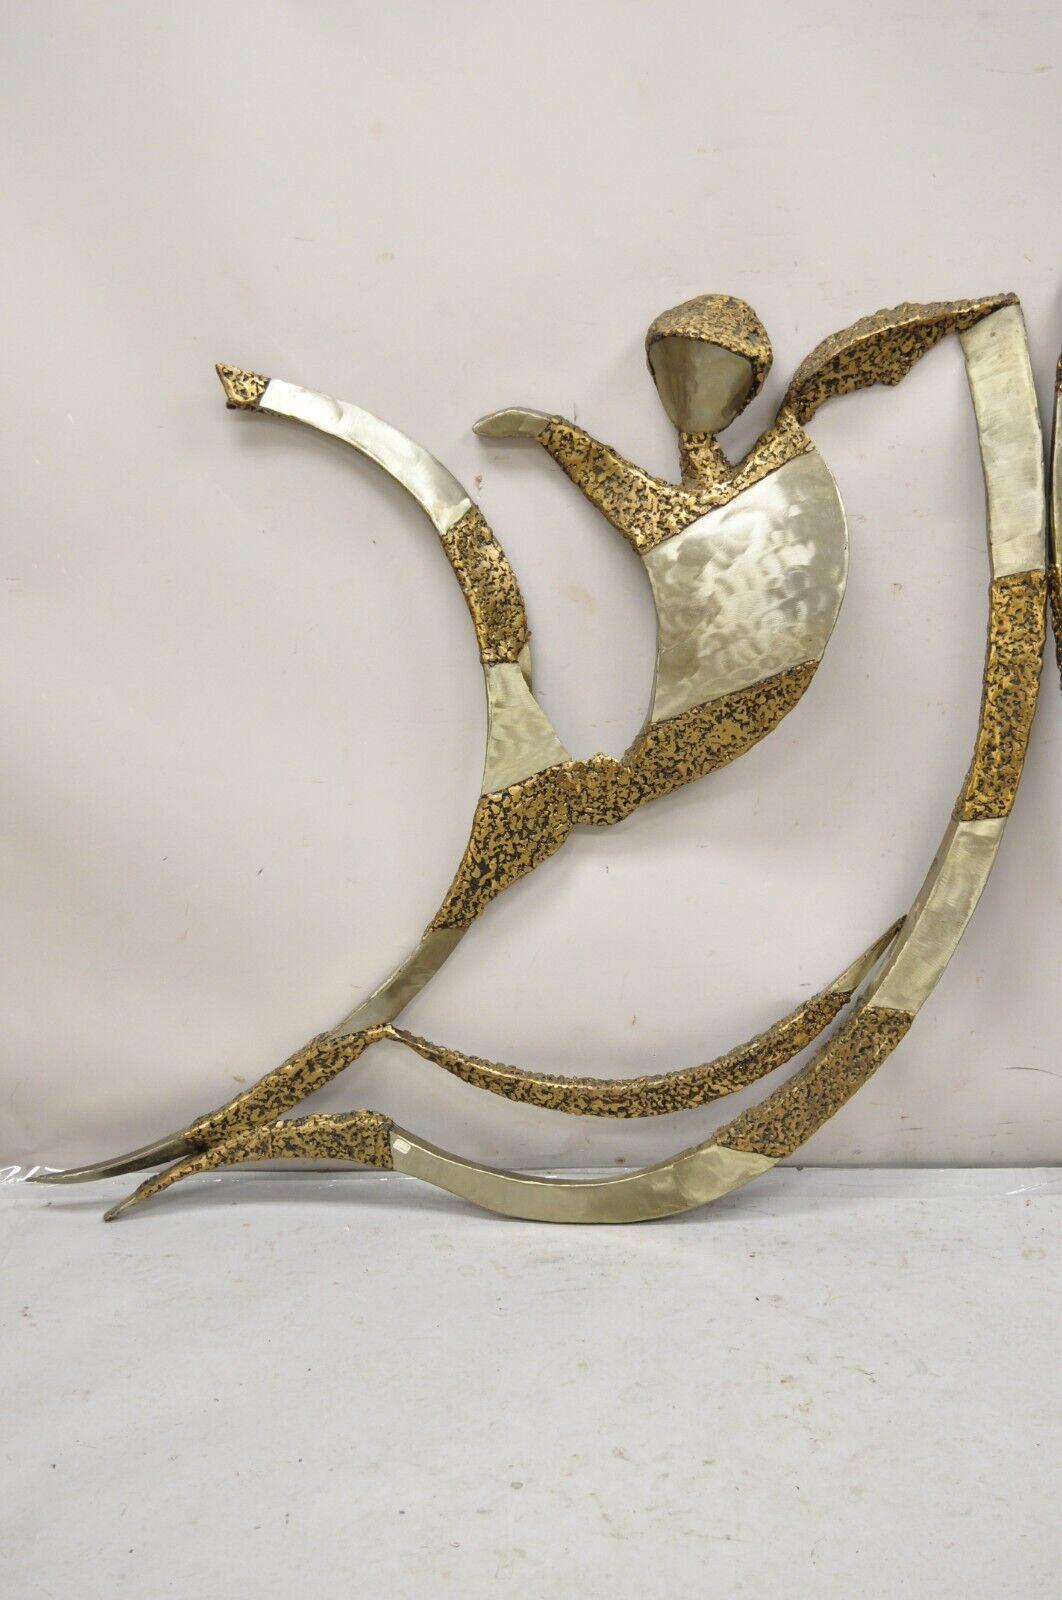 Large Colbert Collins 1986 Male and Female Dancers Brutalist Wall Sculptures - 2 Pc set . Item featured includes one male and one female dancer sculpture, large impressive size, original artist signature and date, approx. 30-40 lbs each, very nice